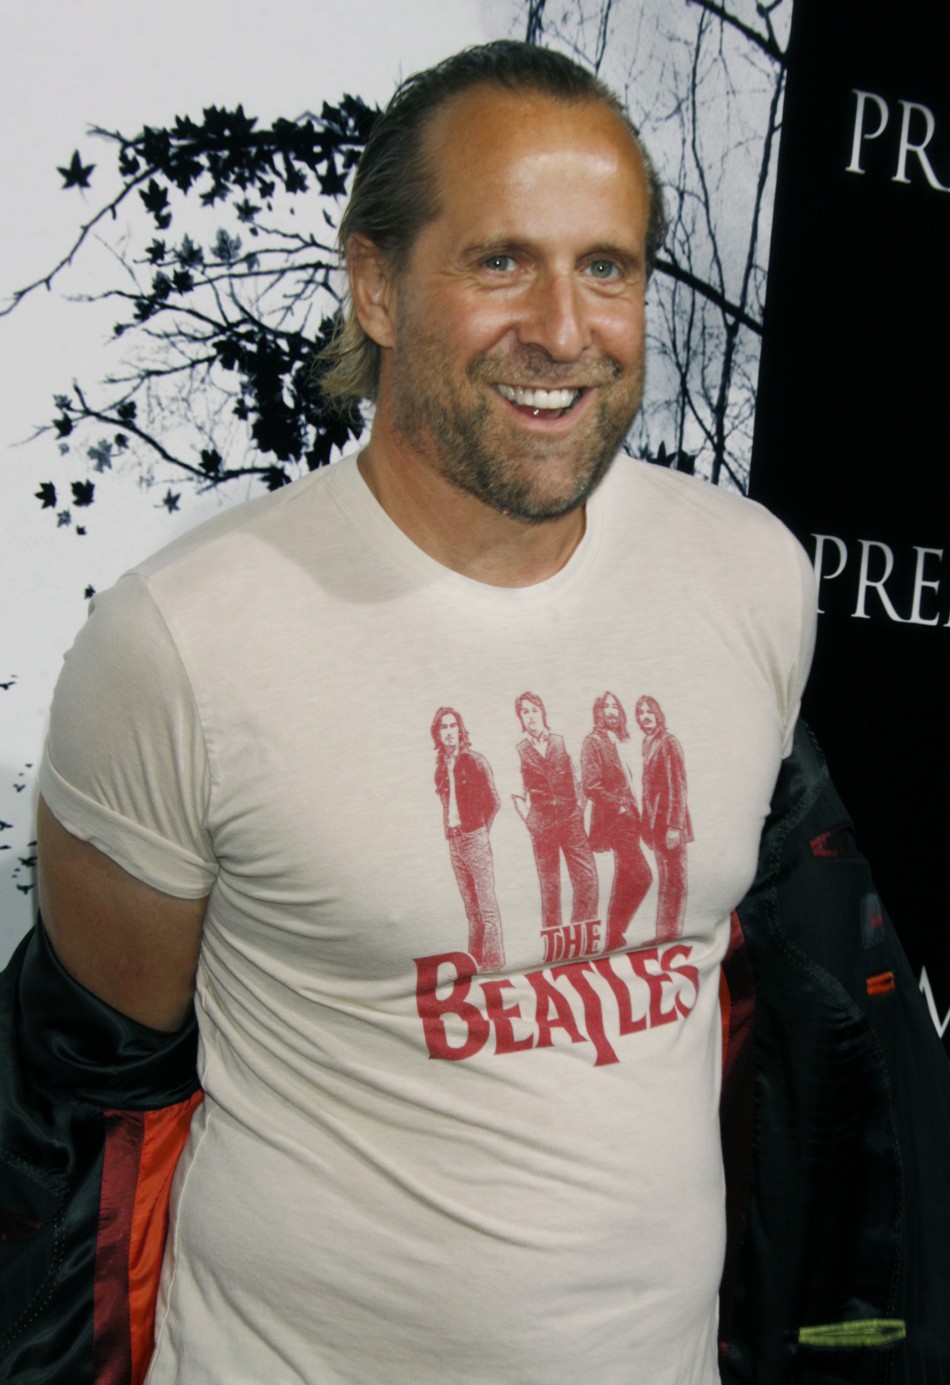 Peter Stormare began his acting career at the Royal National Theatre of Sweden, performing for eleven years. In 1990 he became the Associate Artistic Director at the Tokyo Globe Theatre and directed productions of many Shakespeare plays, including quotH